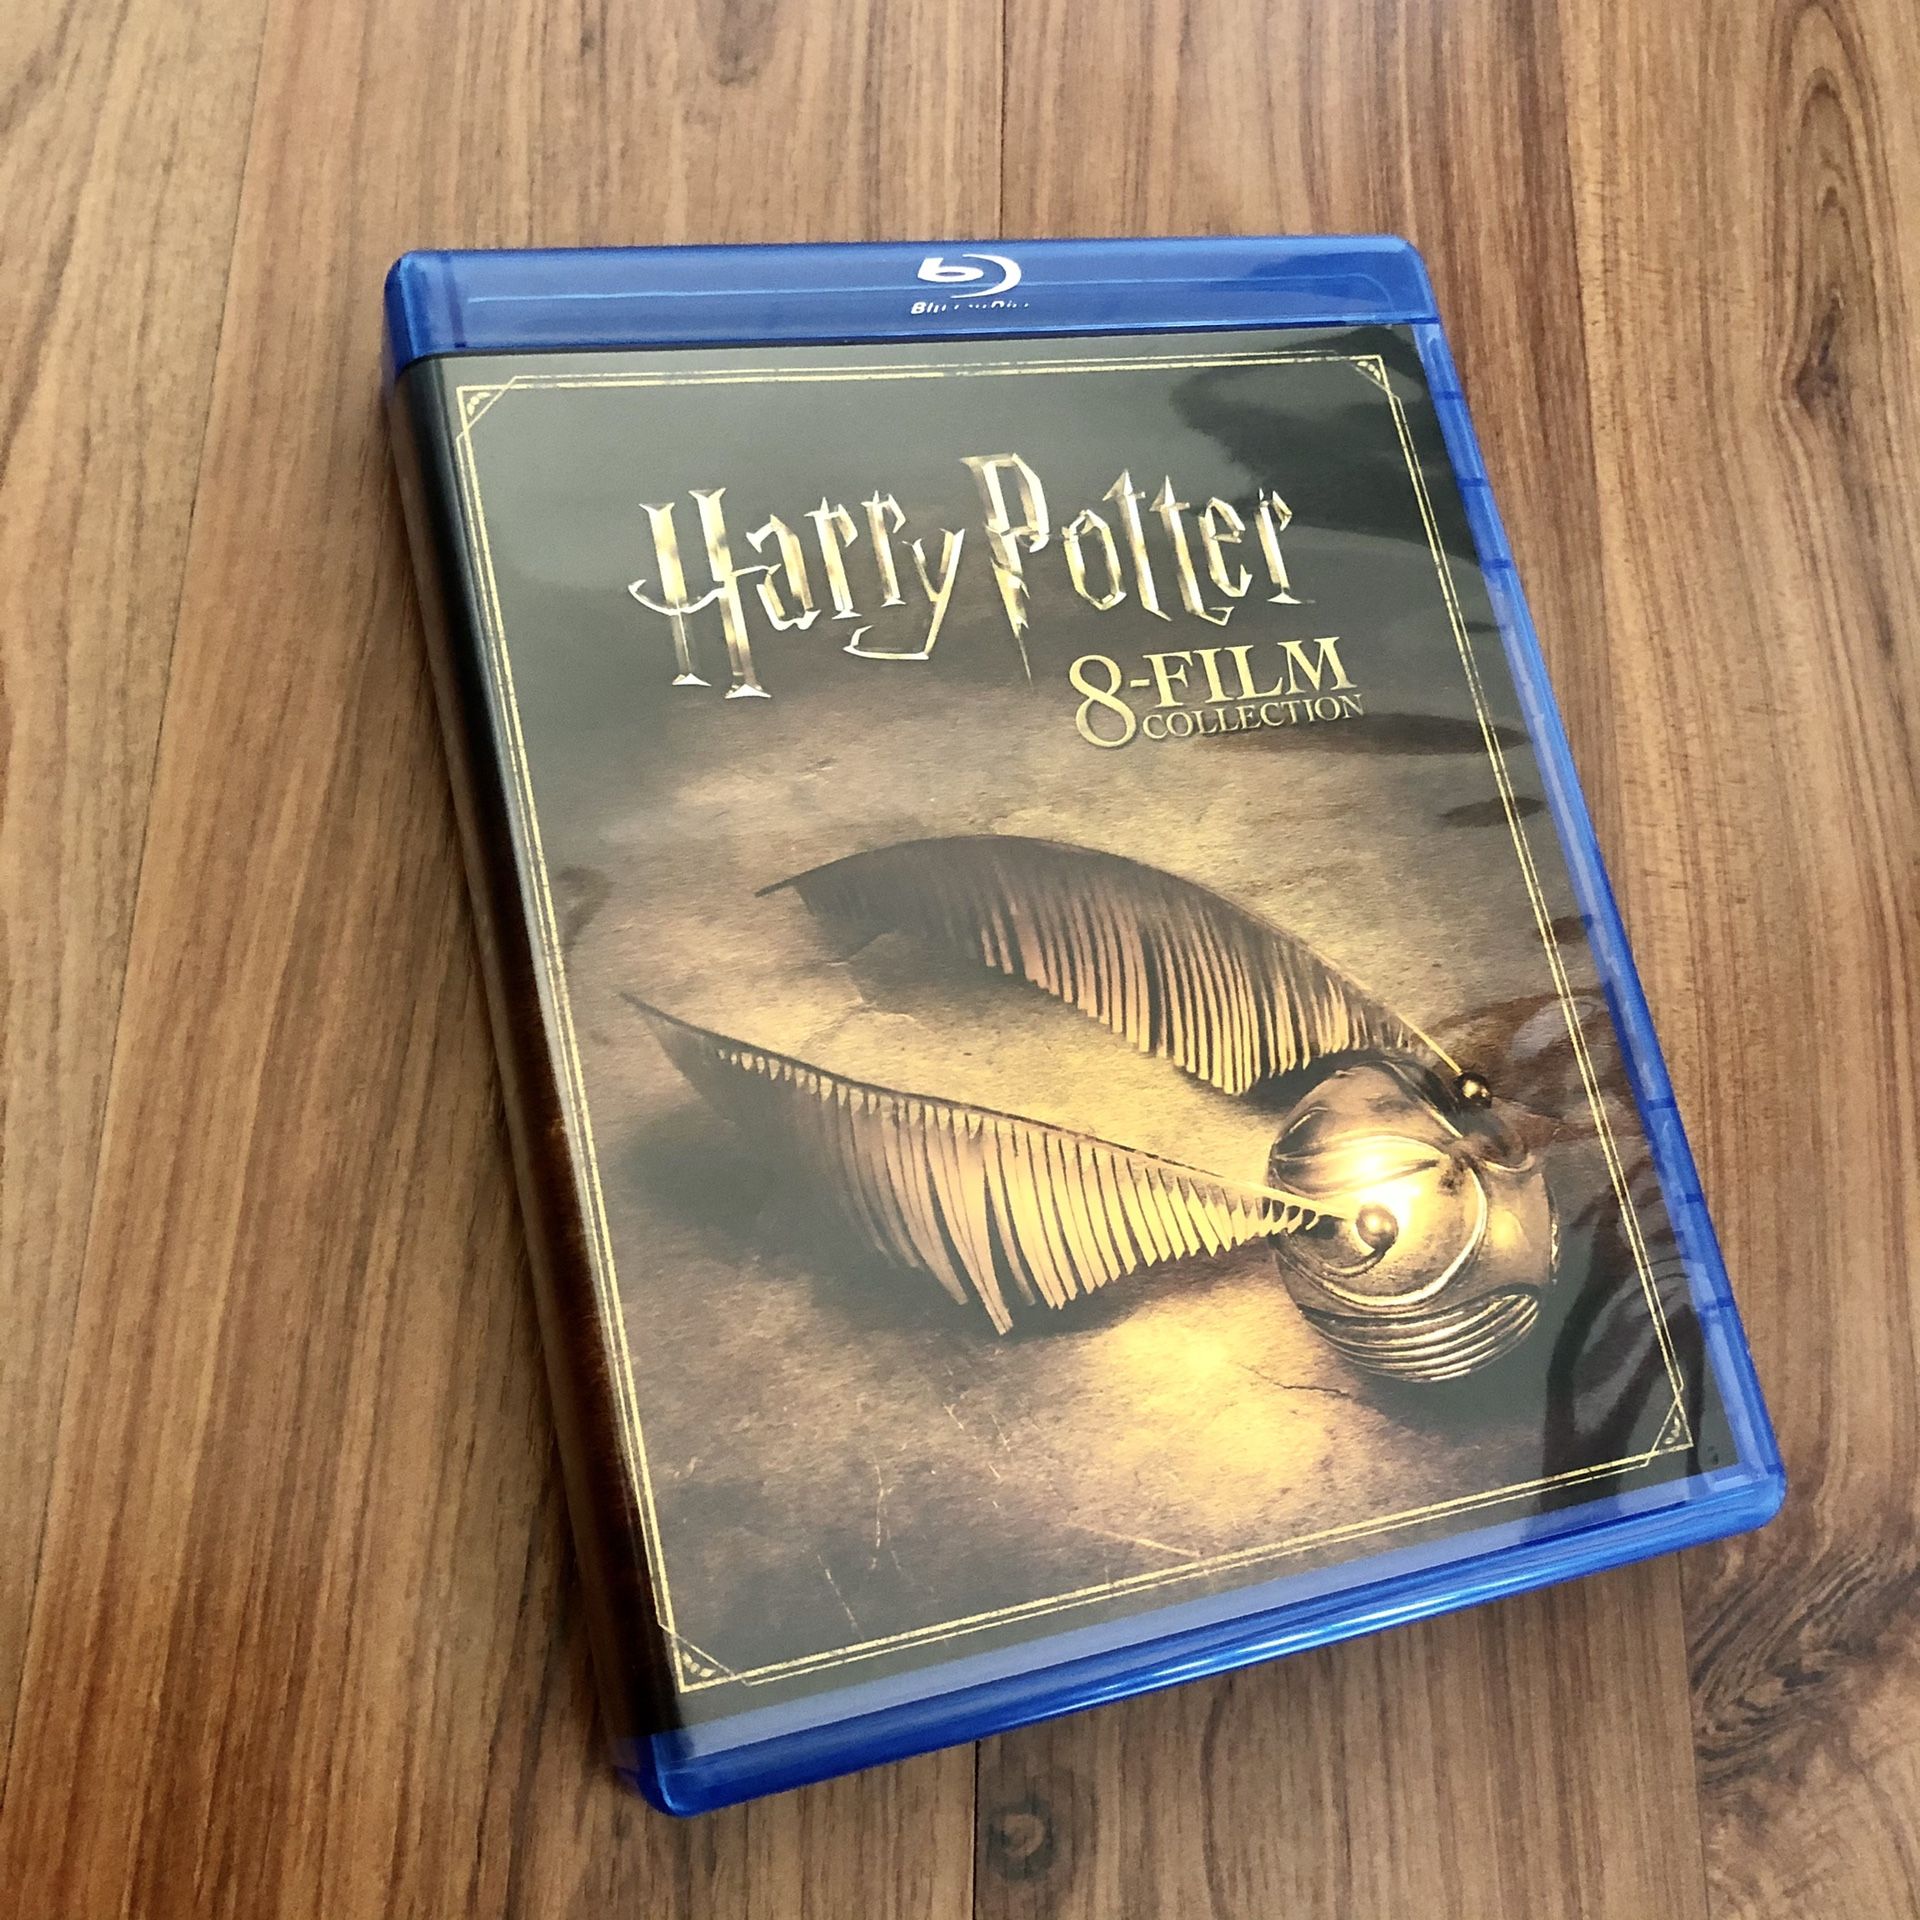 Harry Potter: Complete 8-Film Collection Set (Blu-ray Disc, 8-Disc Set)